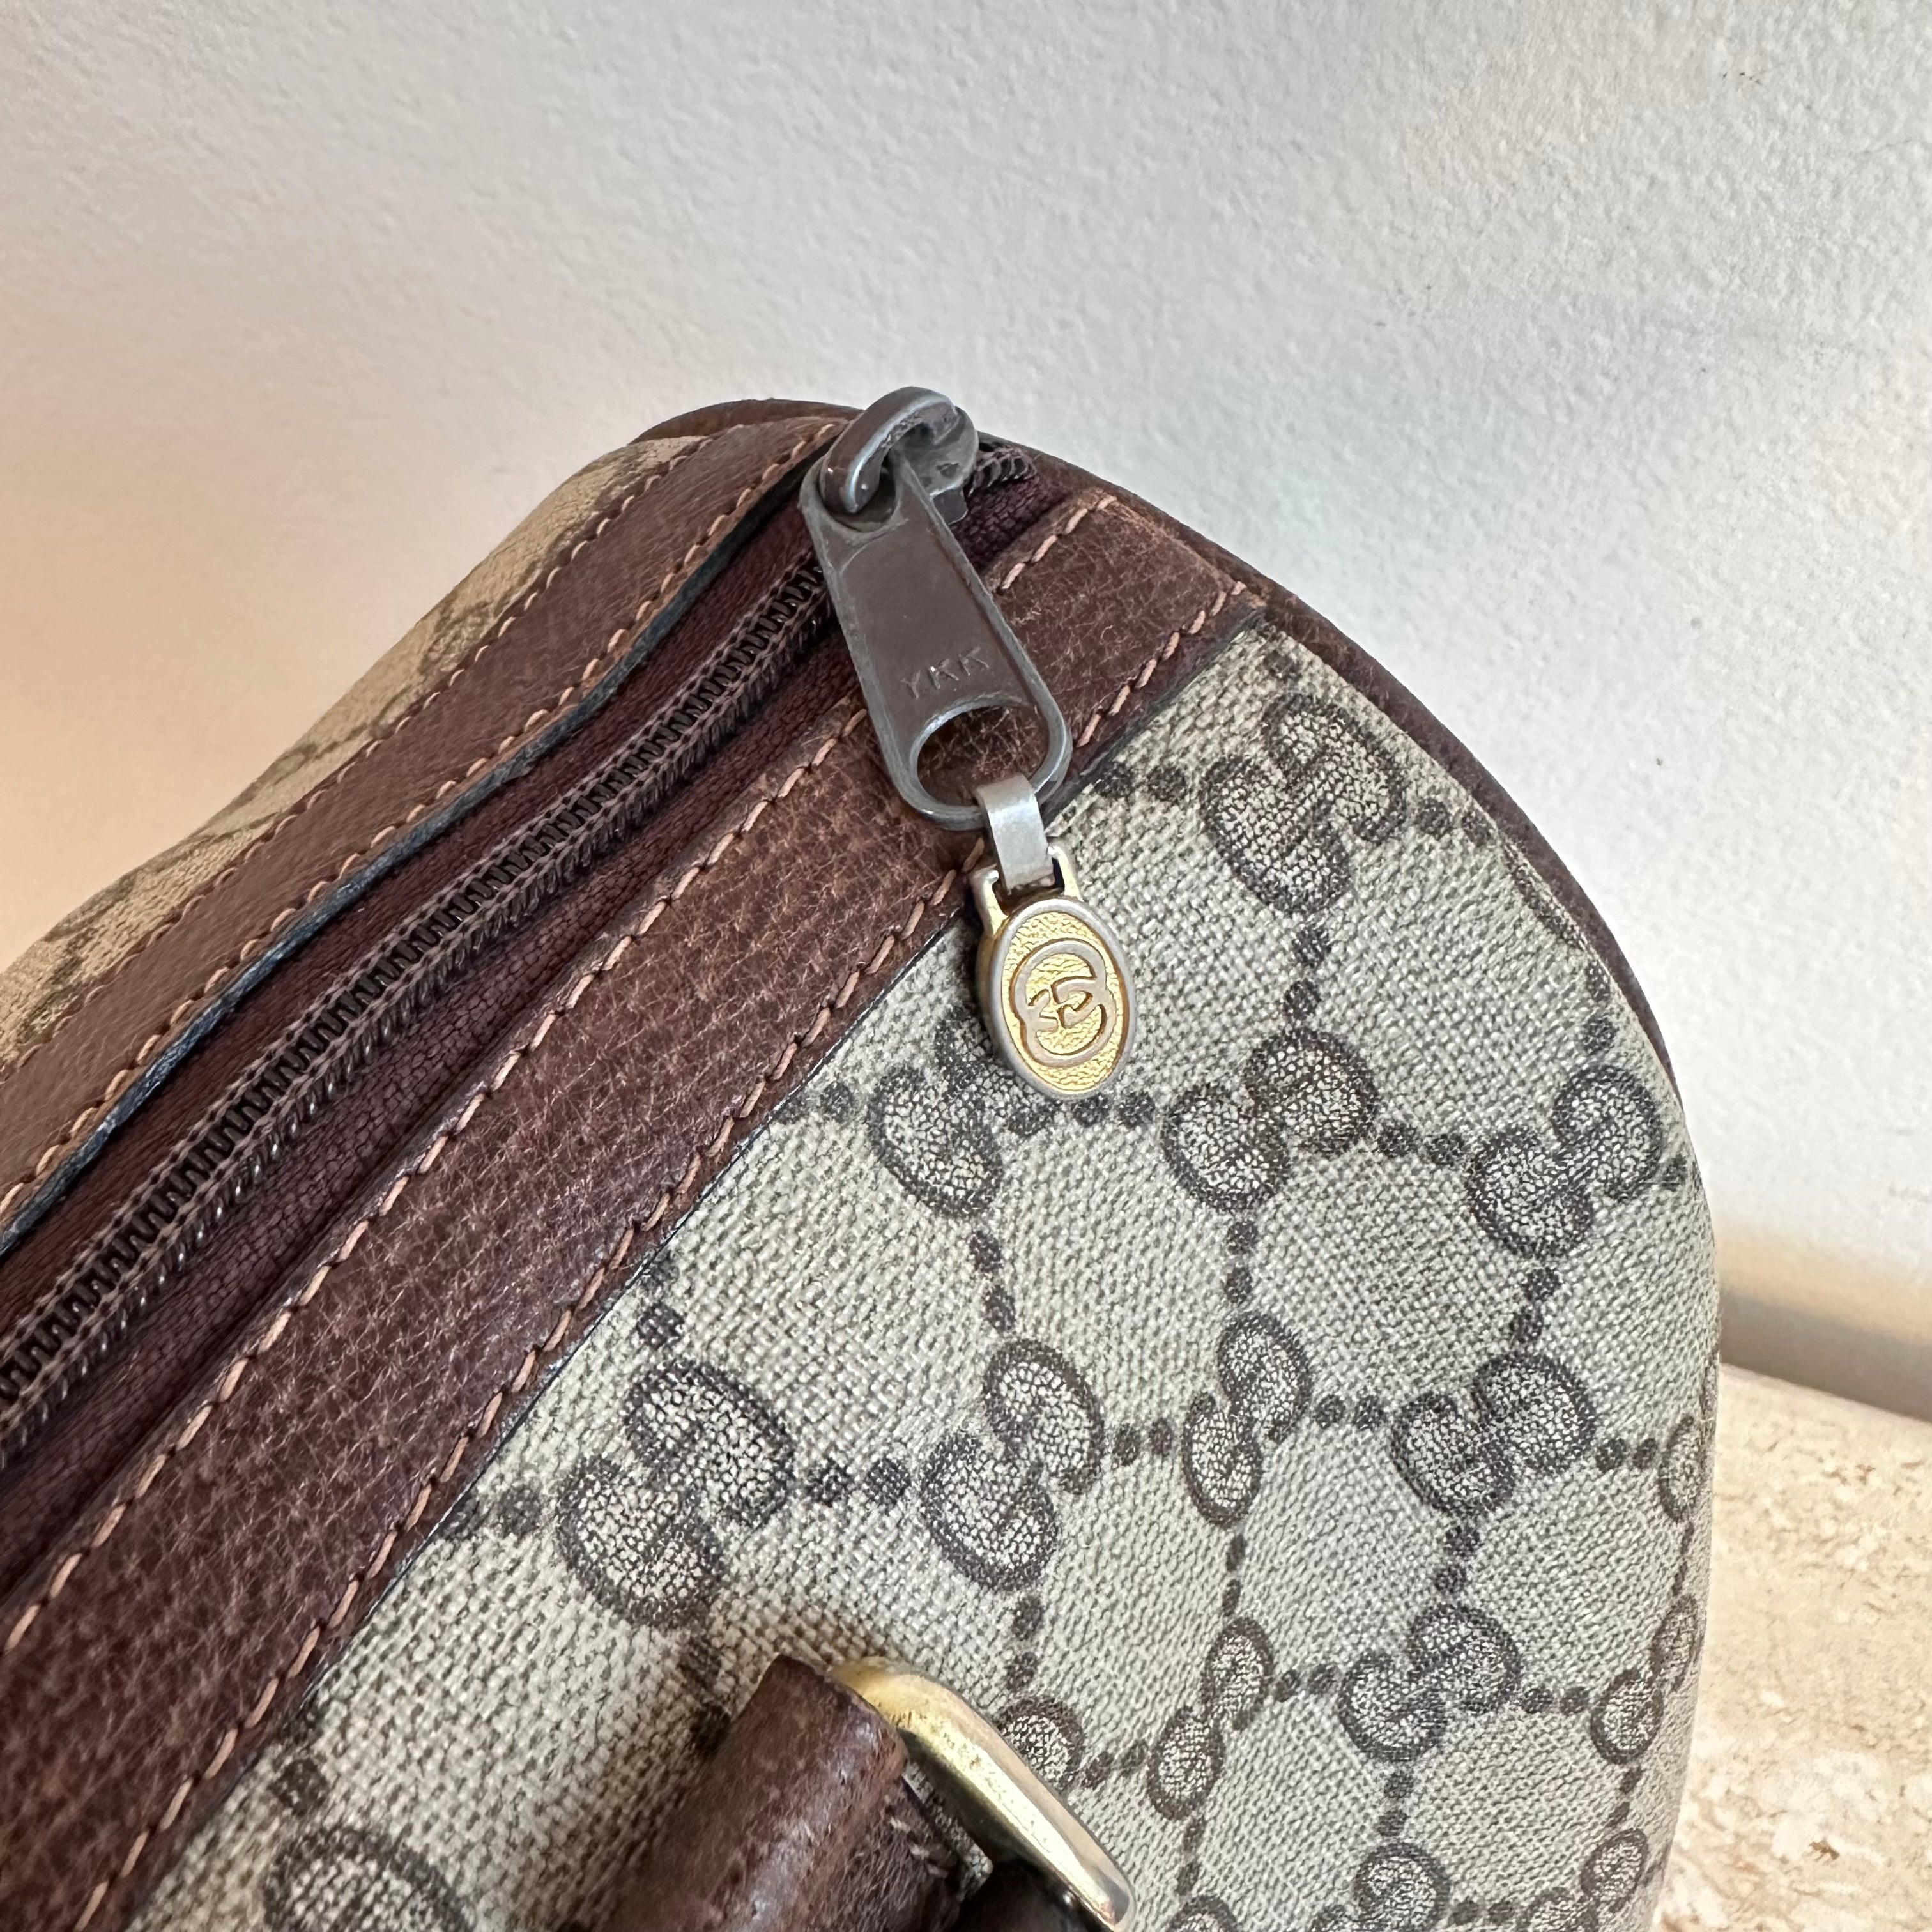 Pre-Owned GUCCI Vintage Boston Bag